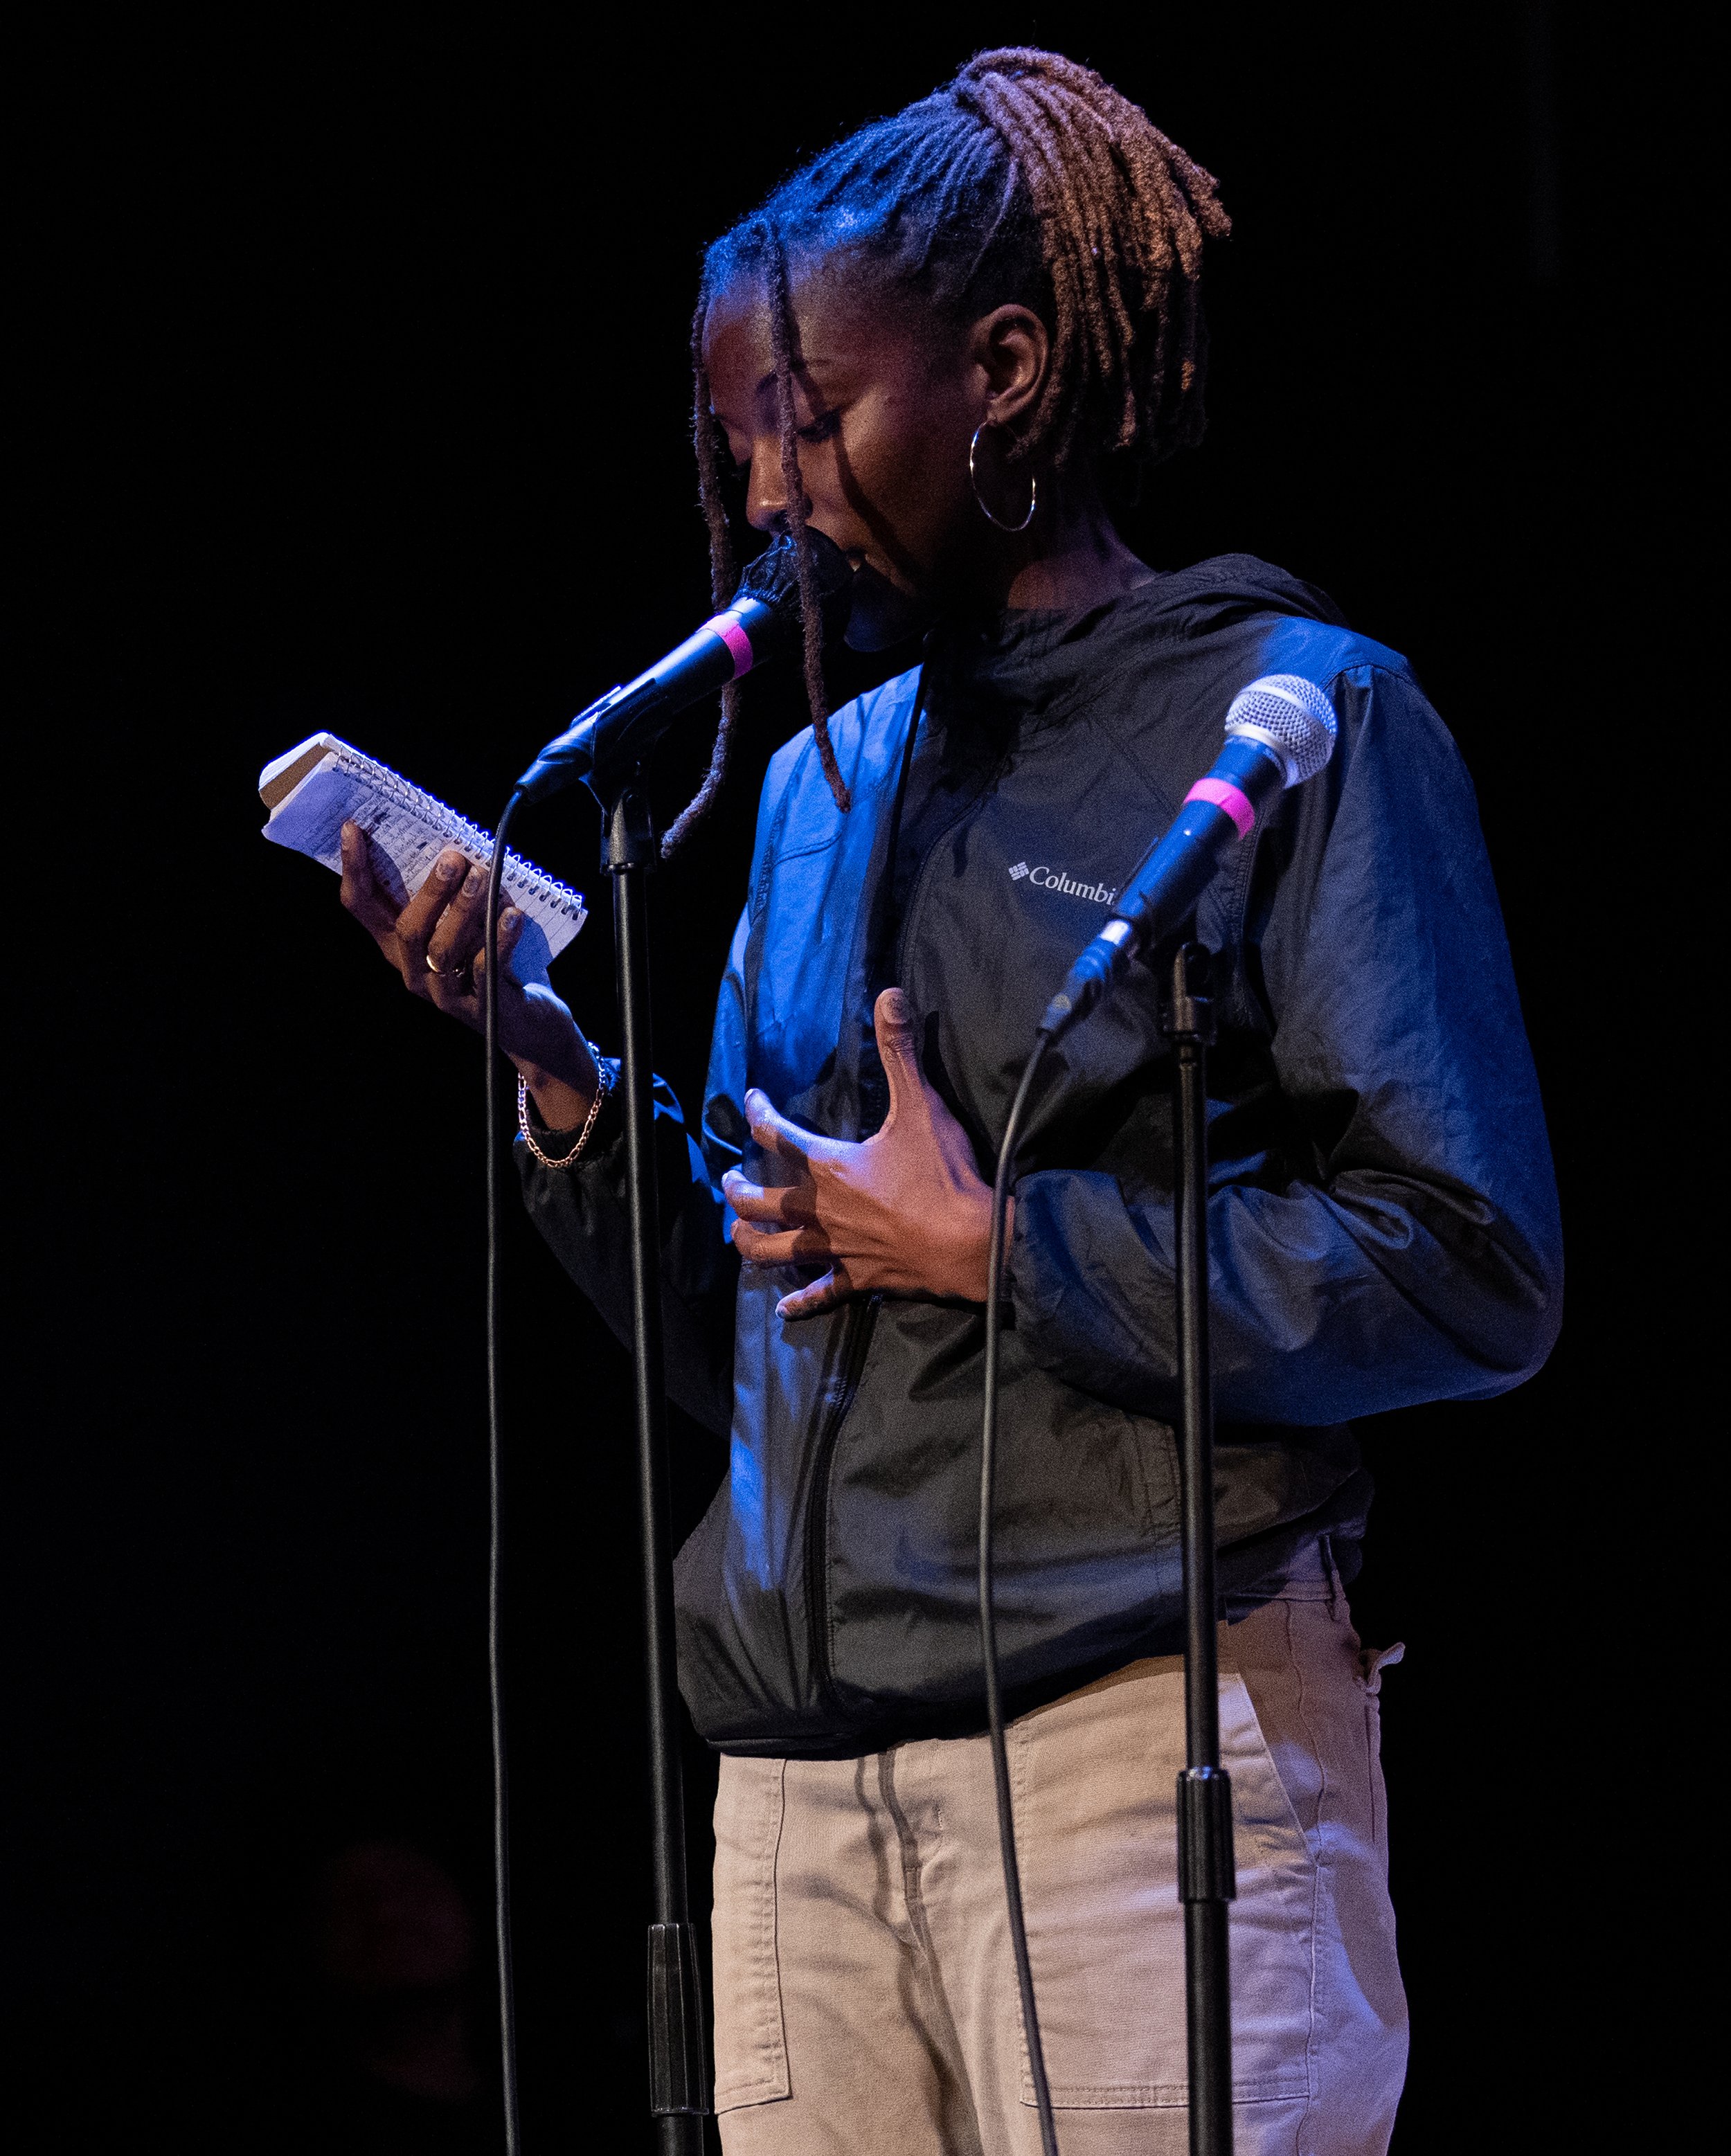  Tuesday May 30th 2023Live at the Greenway Arts Alliance Spoken word night an oral art that is based on poems that were written by the performer’s and spoken in their own aesthetic qualities. There were two Santa Monica students Marie Del Rosario and